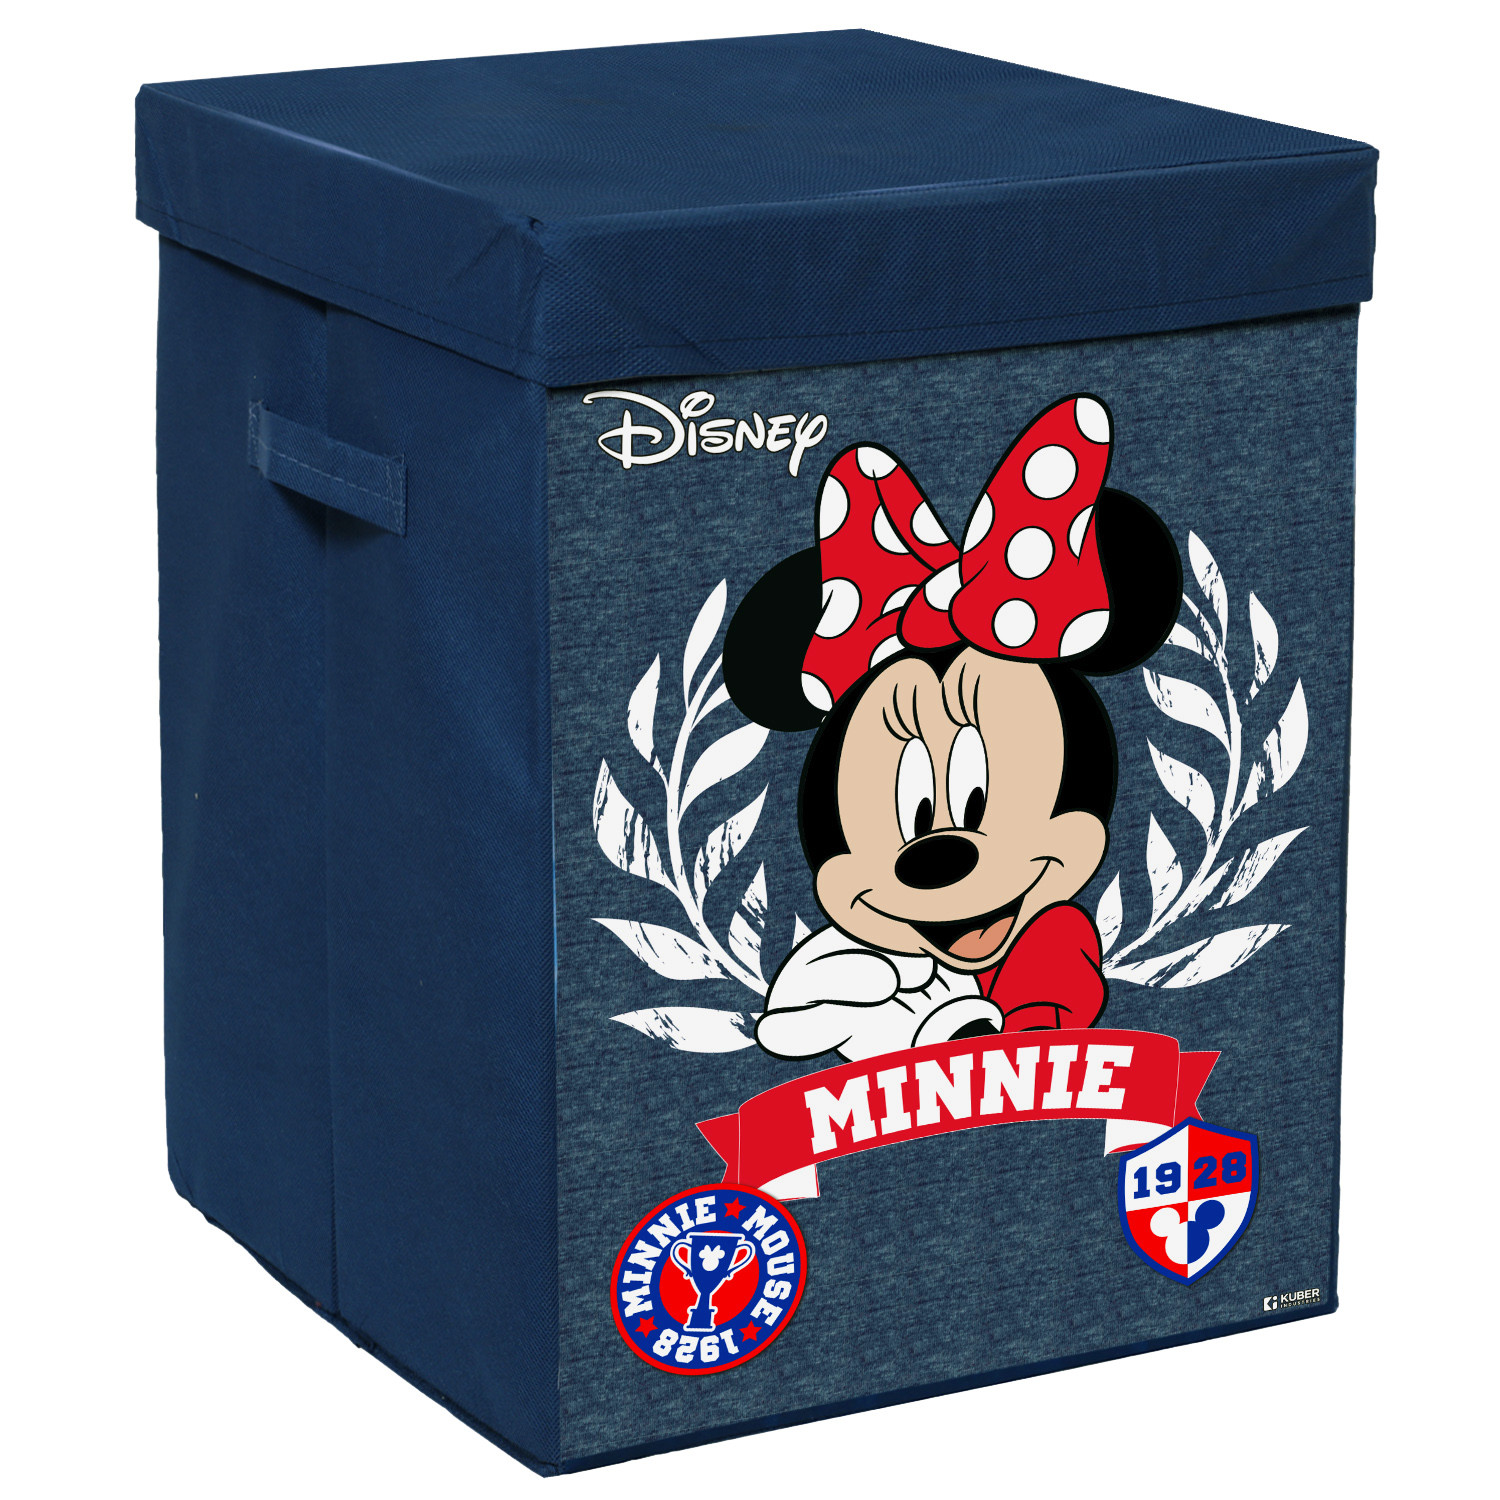 Kuber Industries Disney Minnie Print Foldable Laundry Basket|Clothes Storage Basket With Handle & Lid,60 Ltr.(Navy Blue)